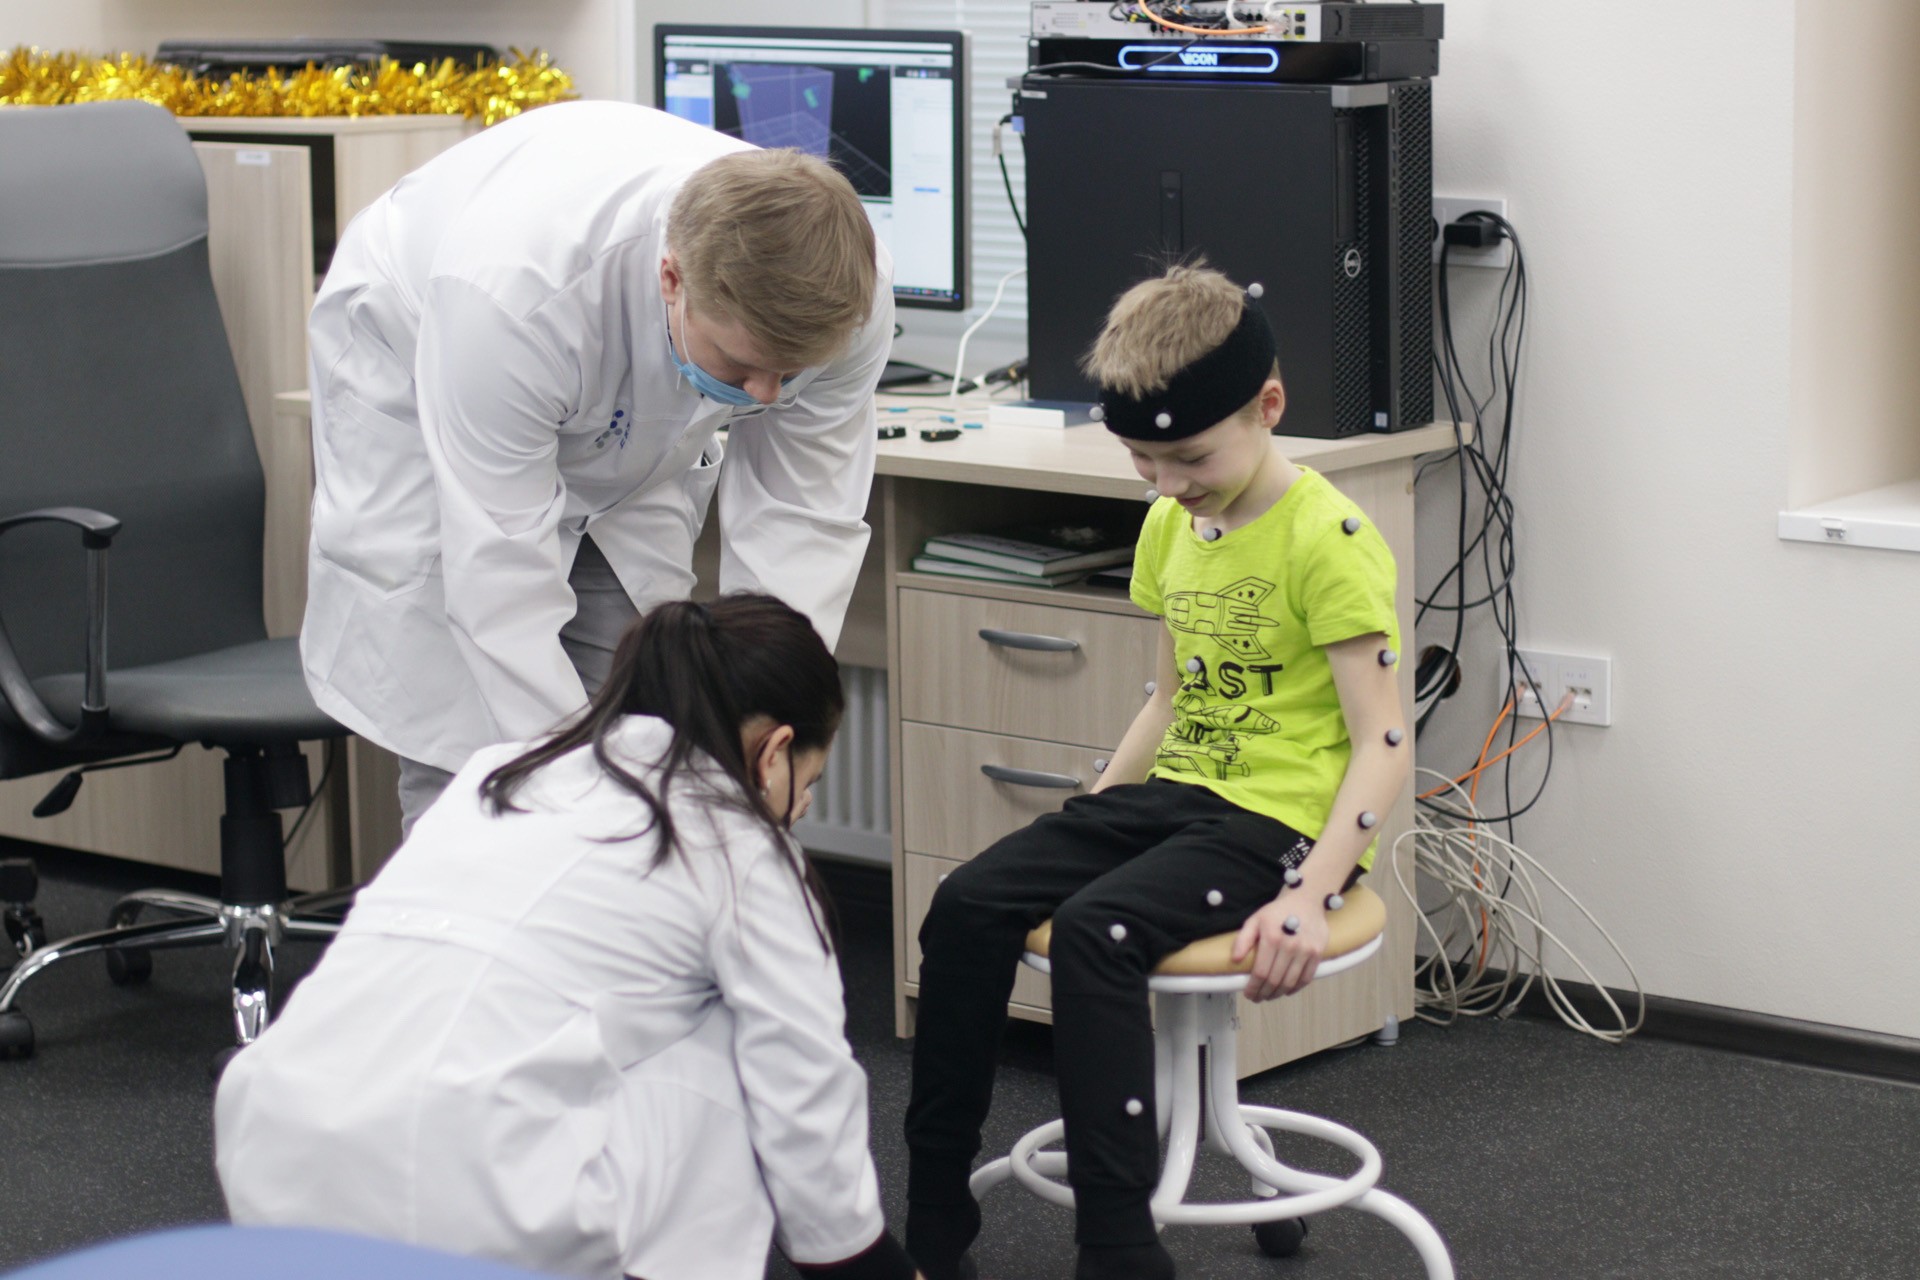 First child patient to be admitted to University's neuro-rehabilitation program